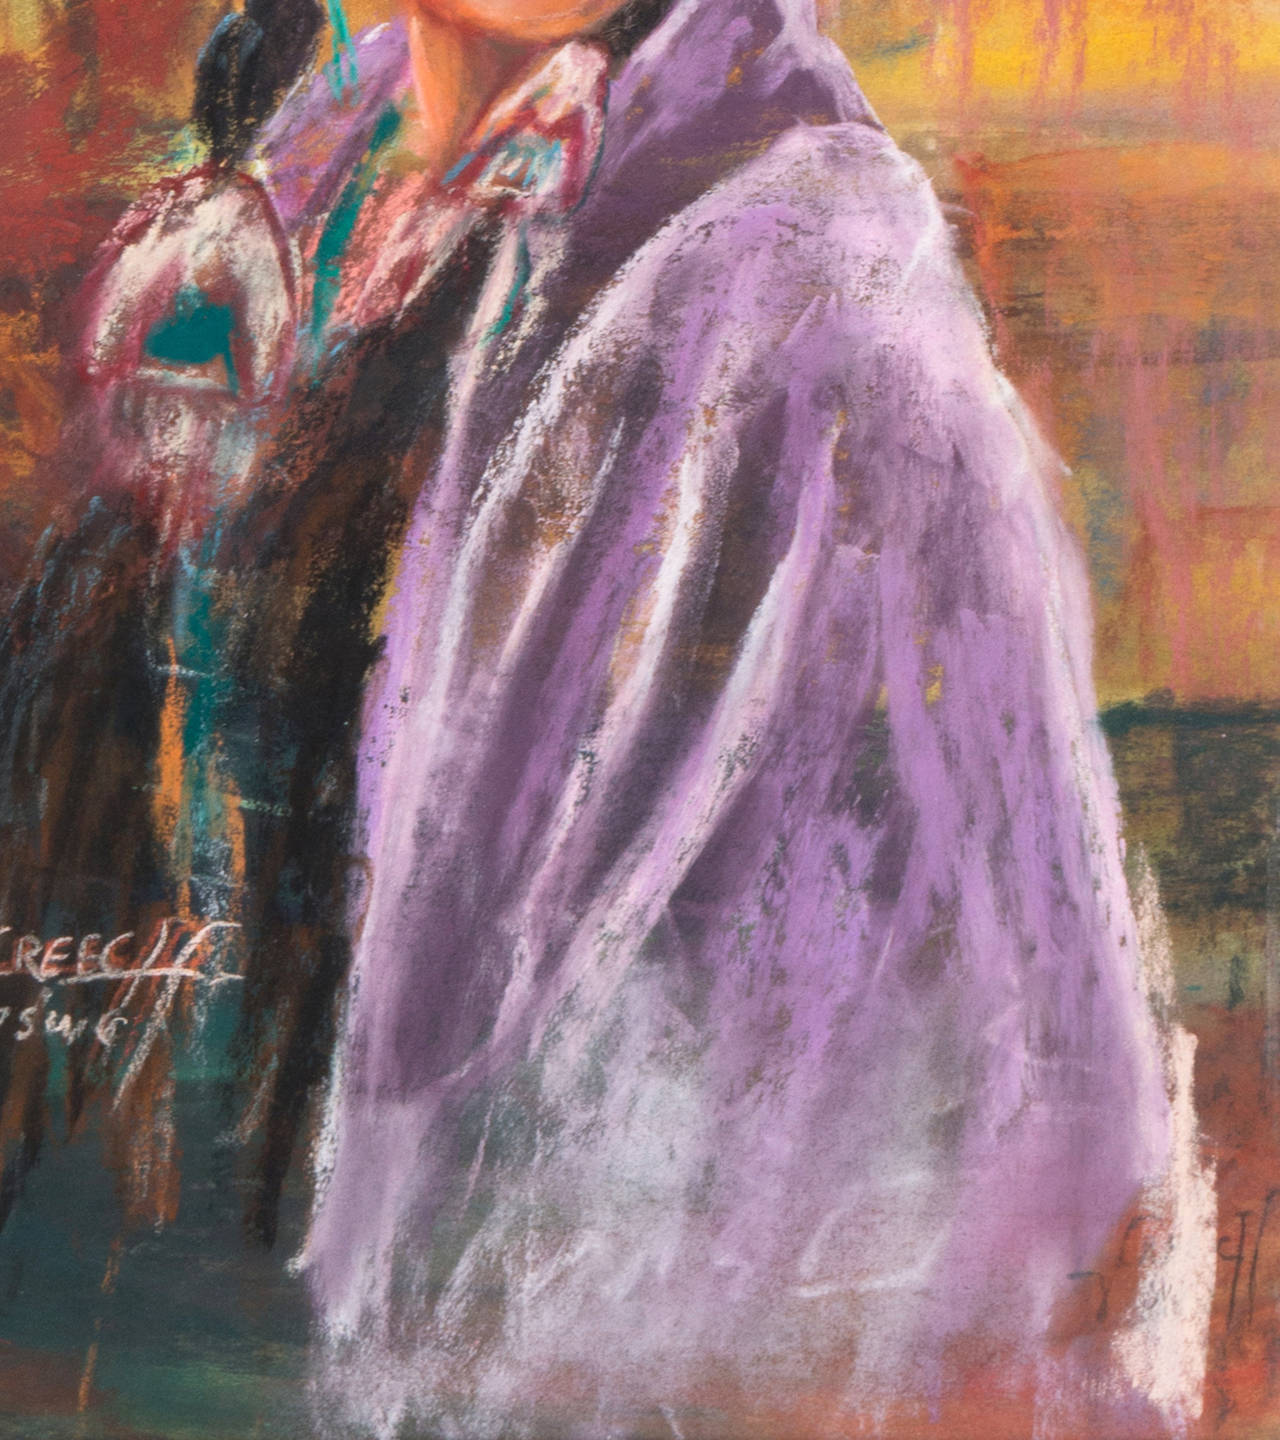 Signed lower left 'Creech PSWC' and created circa 1975

A compelling pastel study showing the subject dressed in brightly-colored ceremonial robes and gazing past the viewer. An elegant work by this well-listed artist and member of the Pastel